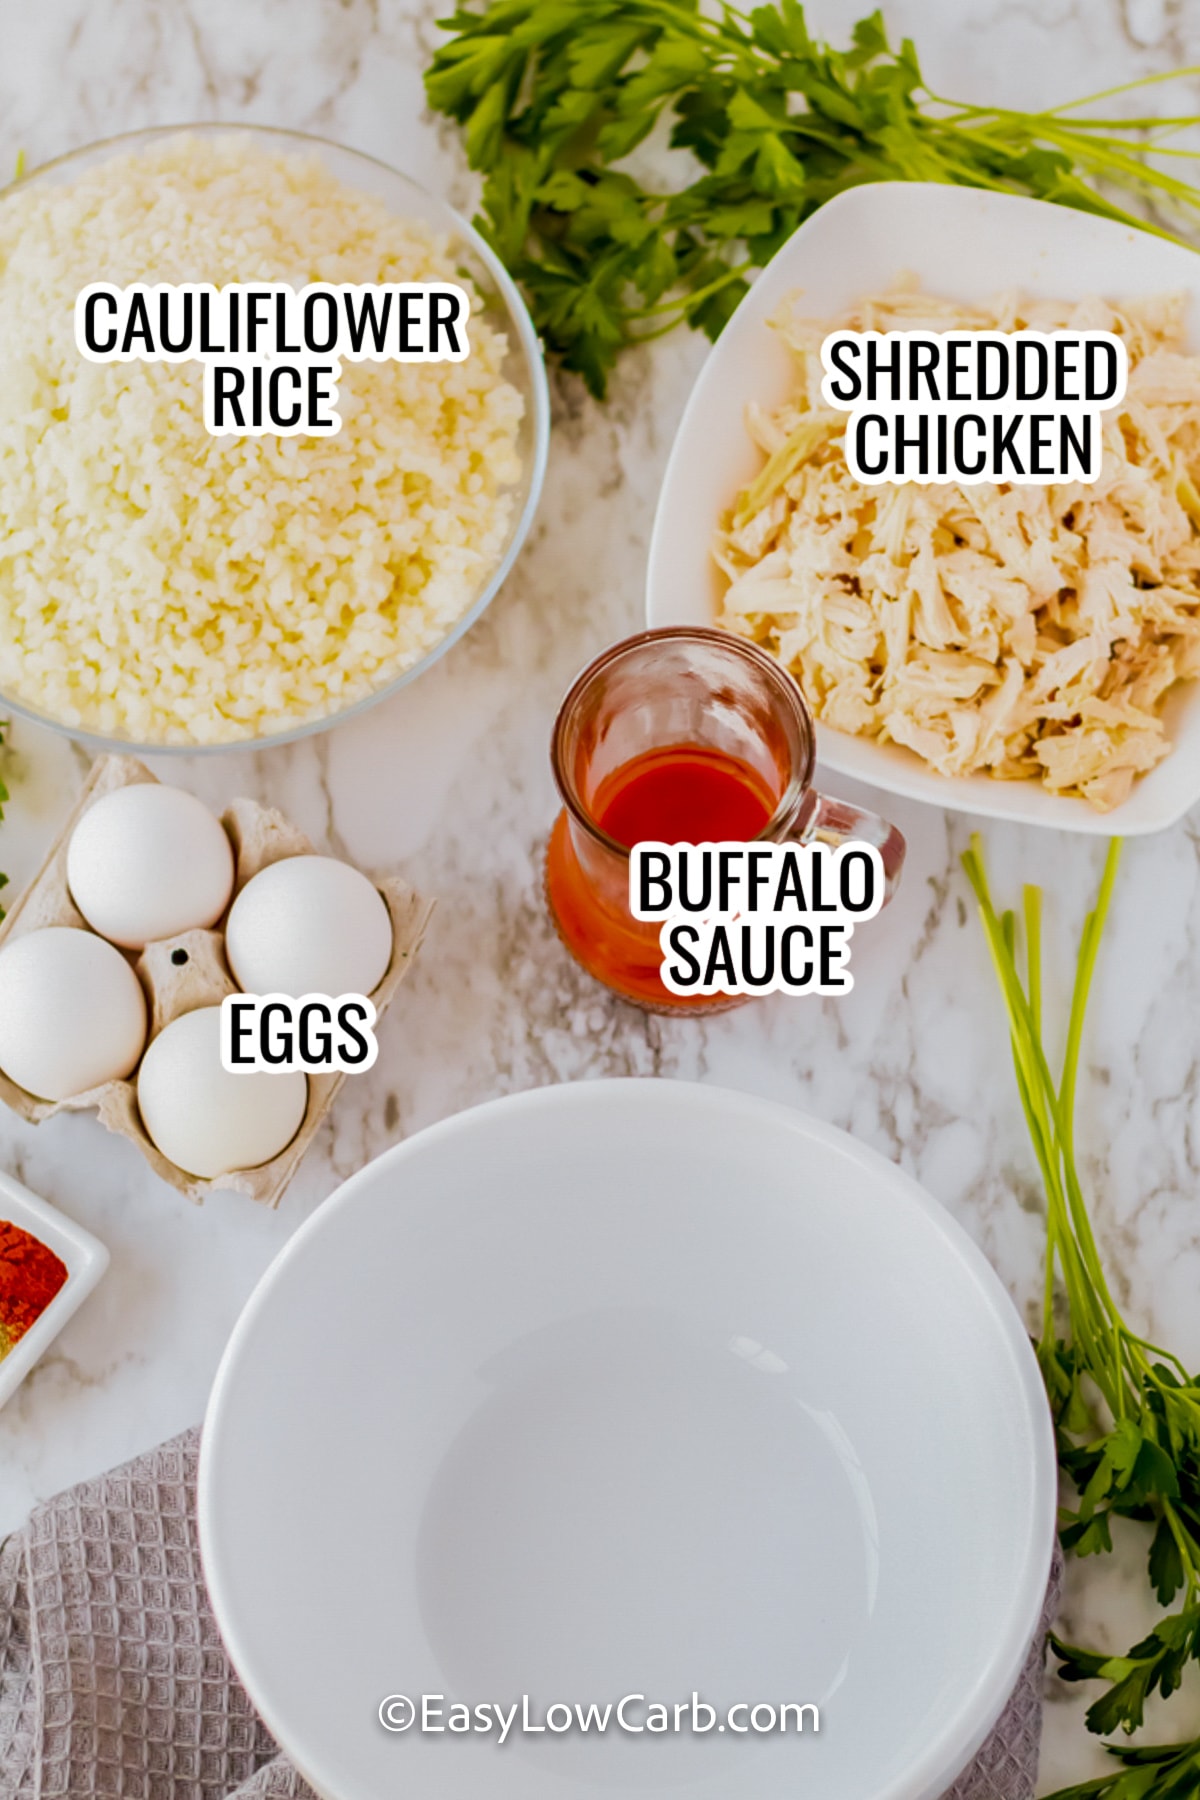 ingredients assembled to make keto buffalo chicken casserole including cauliflower rice, shredded chicken, eggs, and buffalo sauce